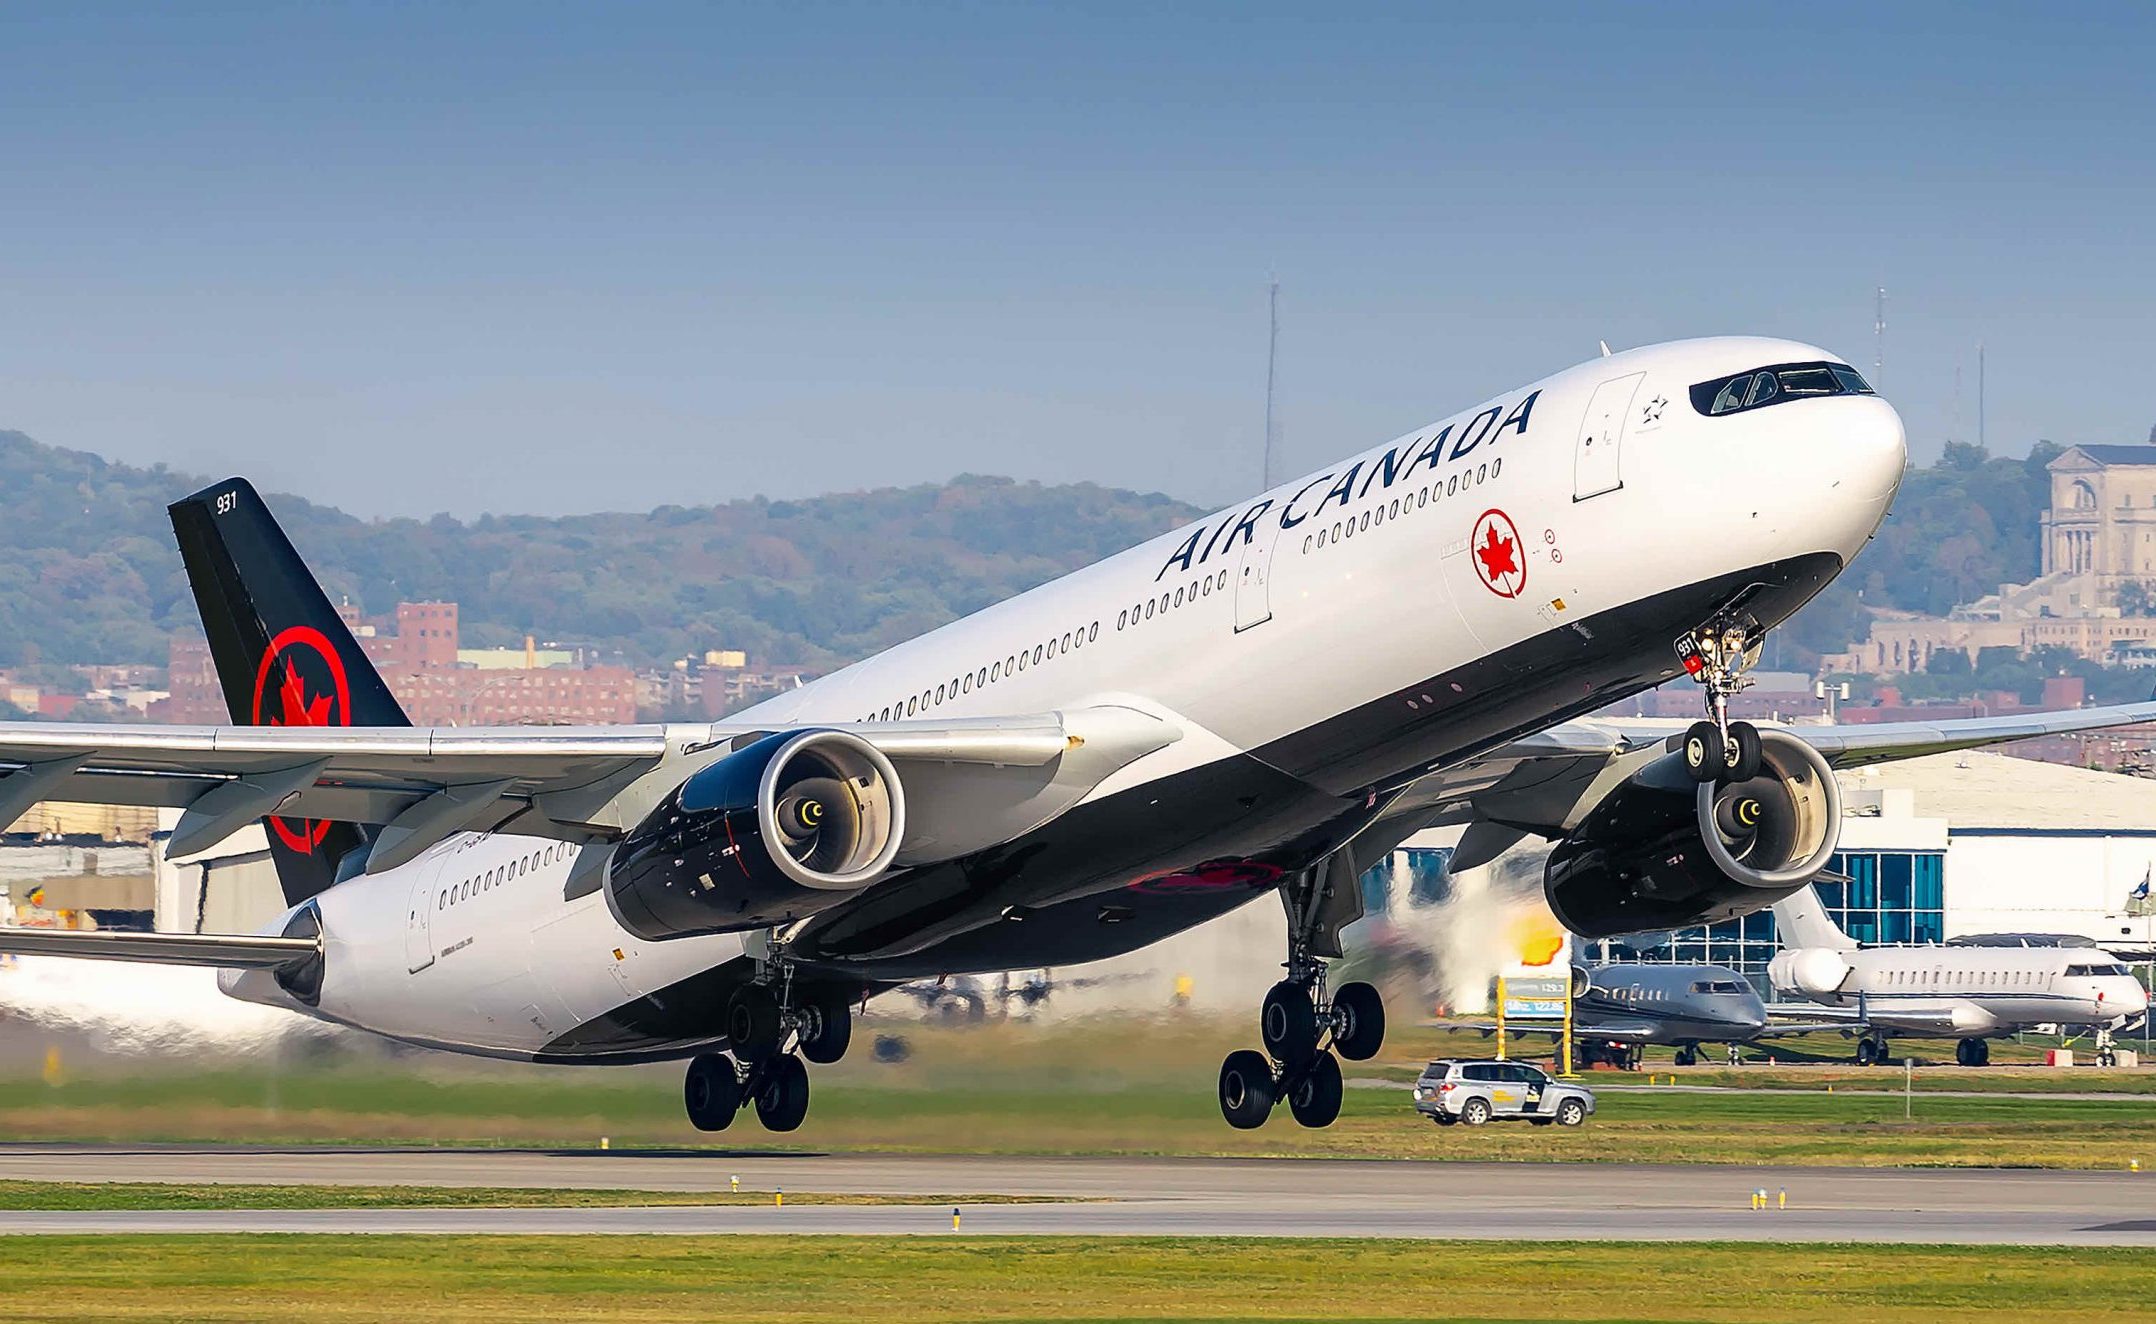 Air Canada’s network of cargo-only flights continues to grow